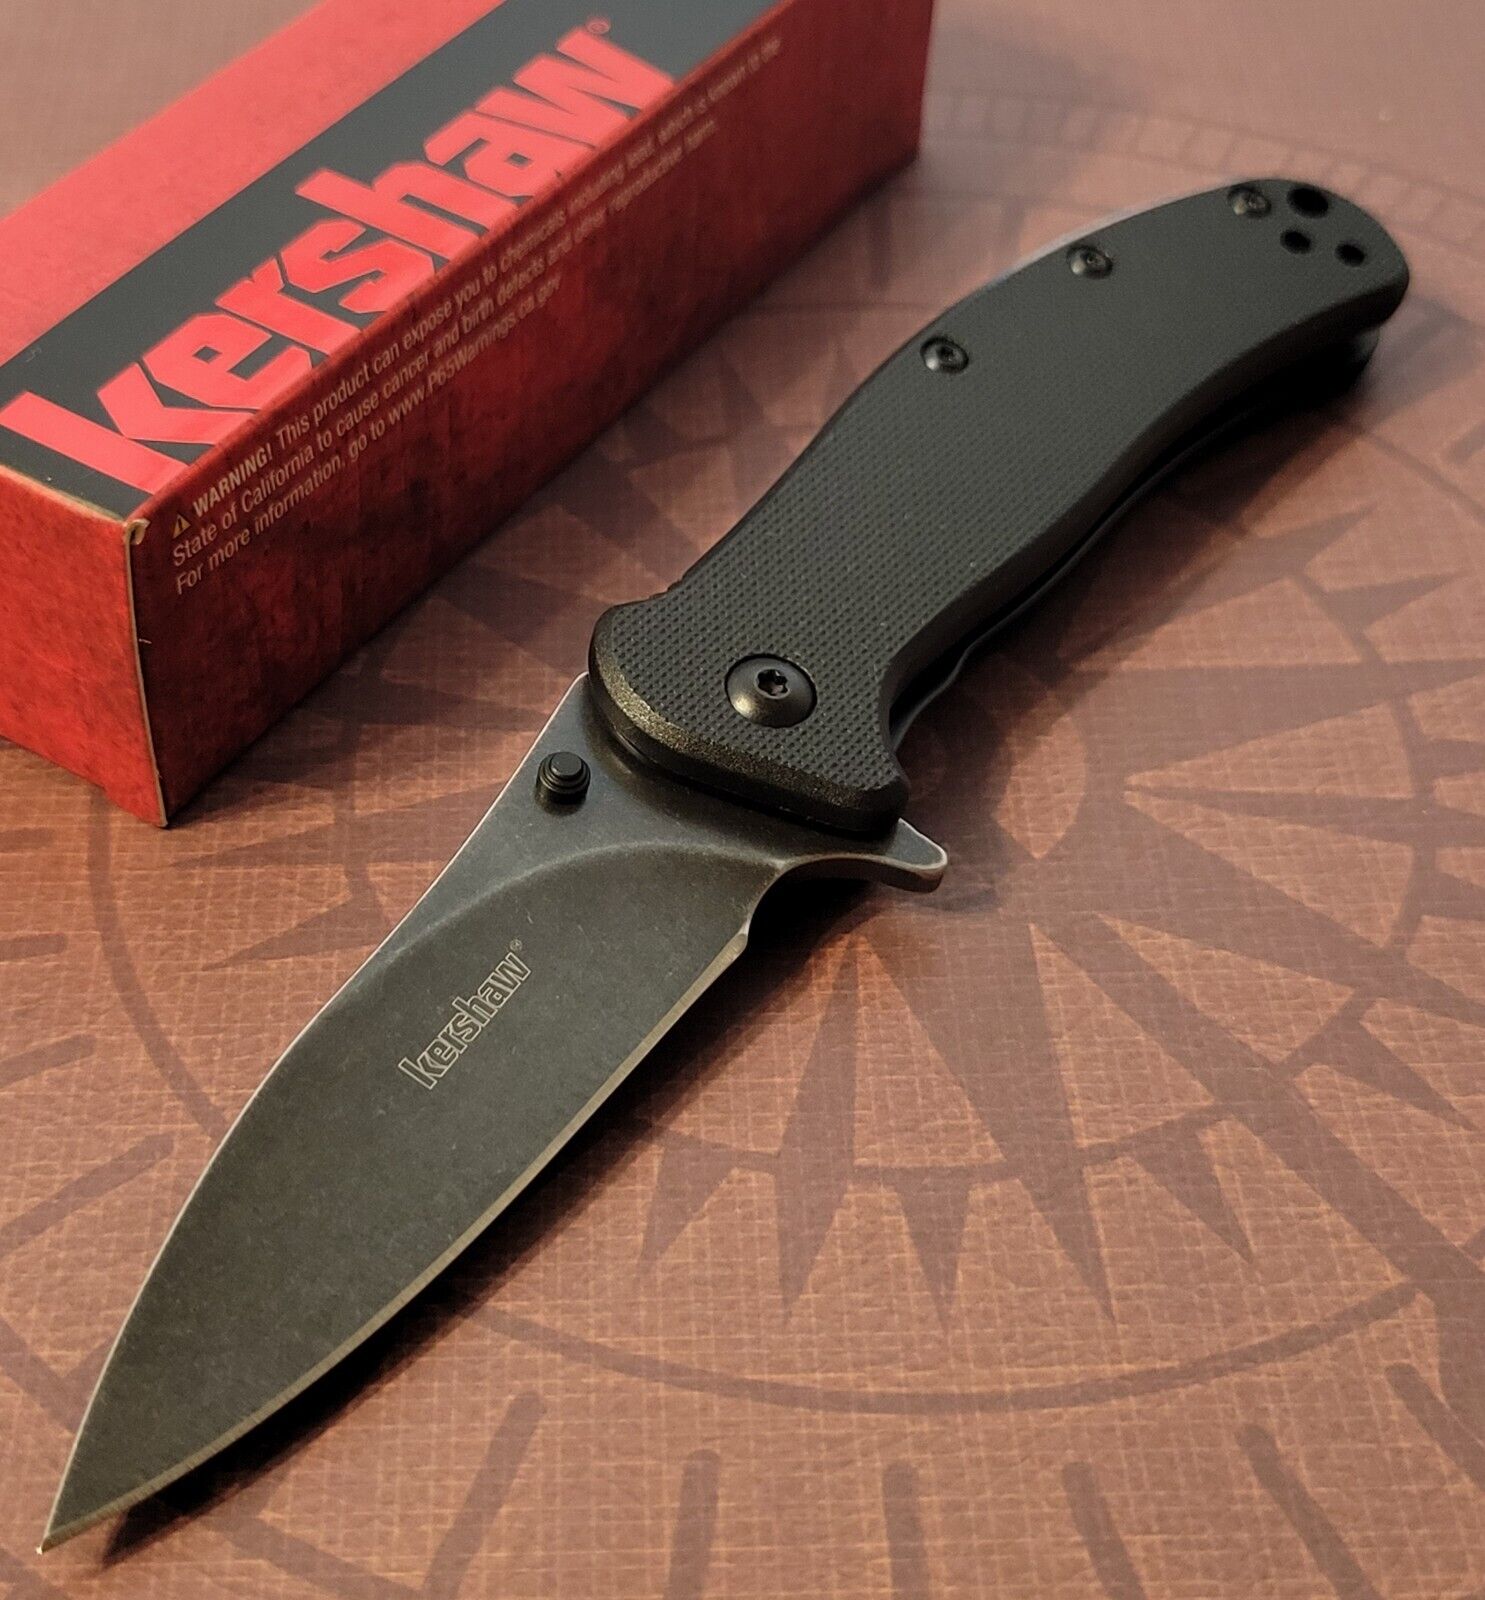 Kershaw Knife Model 1730BWH3 Zing Assisted Opening Liner Lock 8Cr13MoV Steel